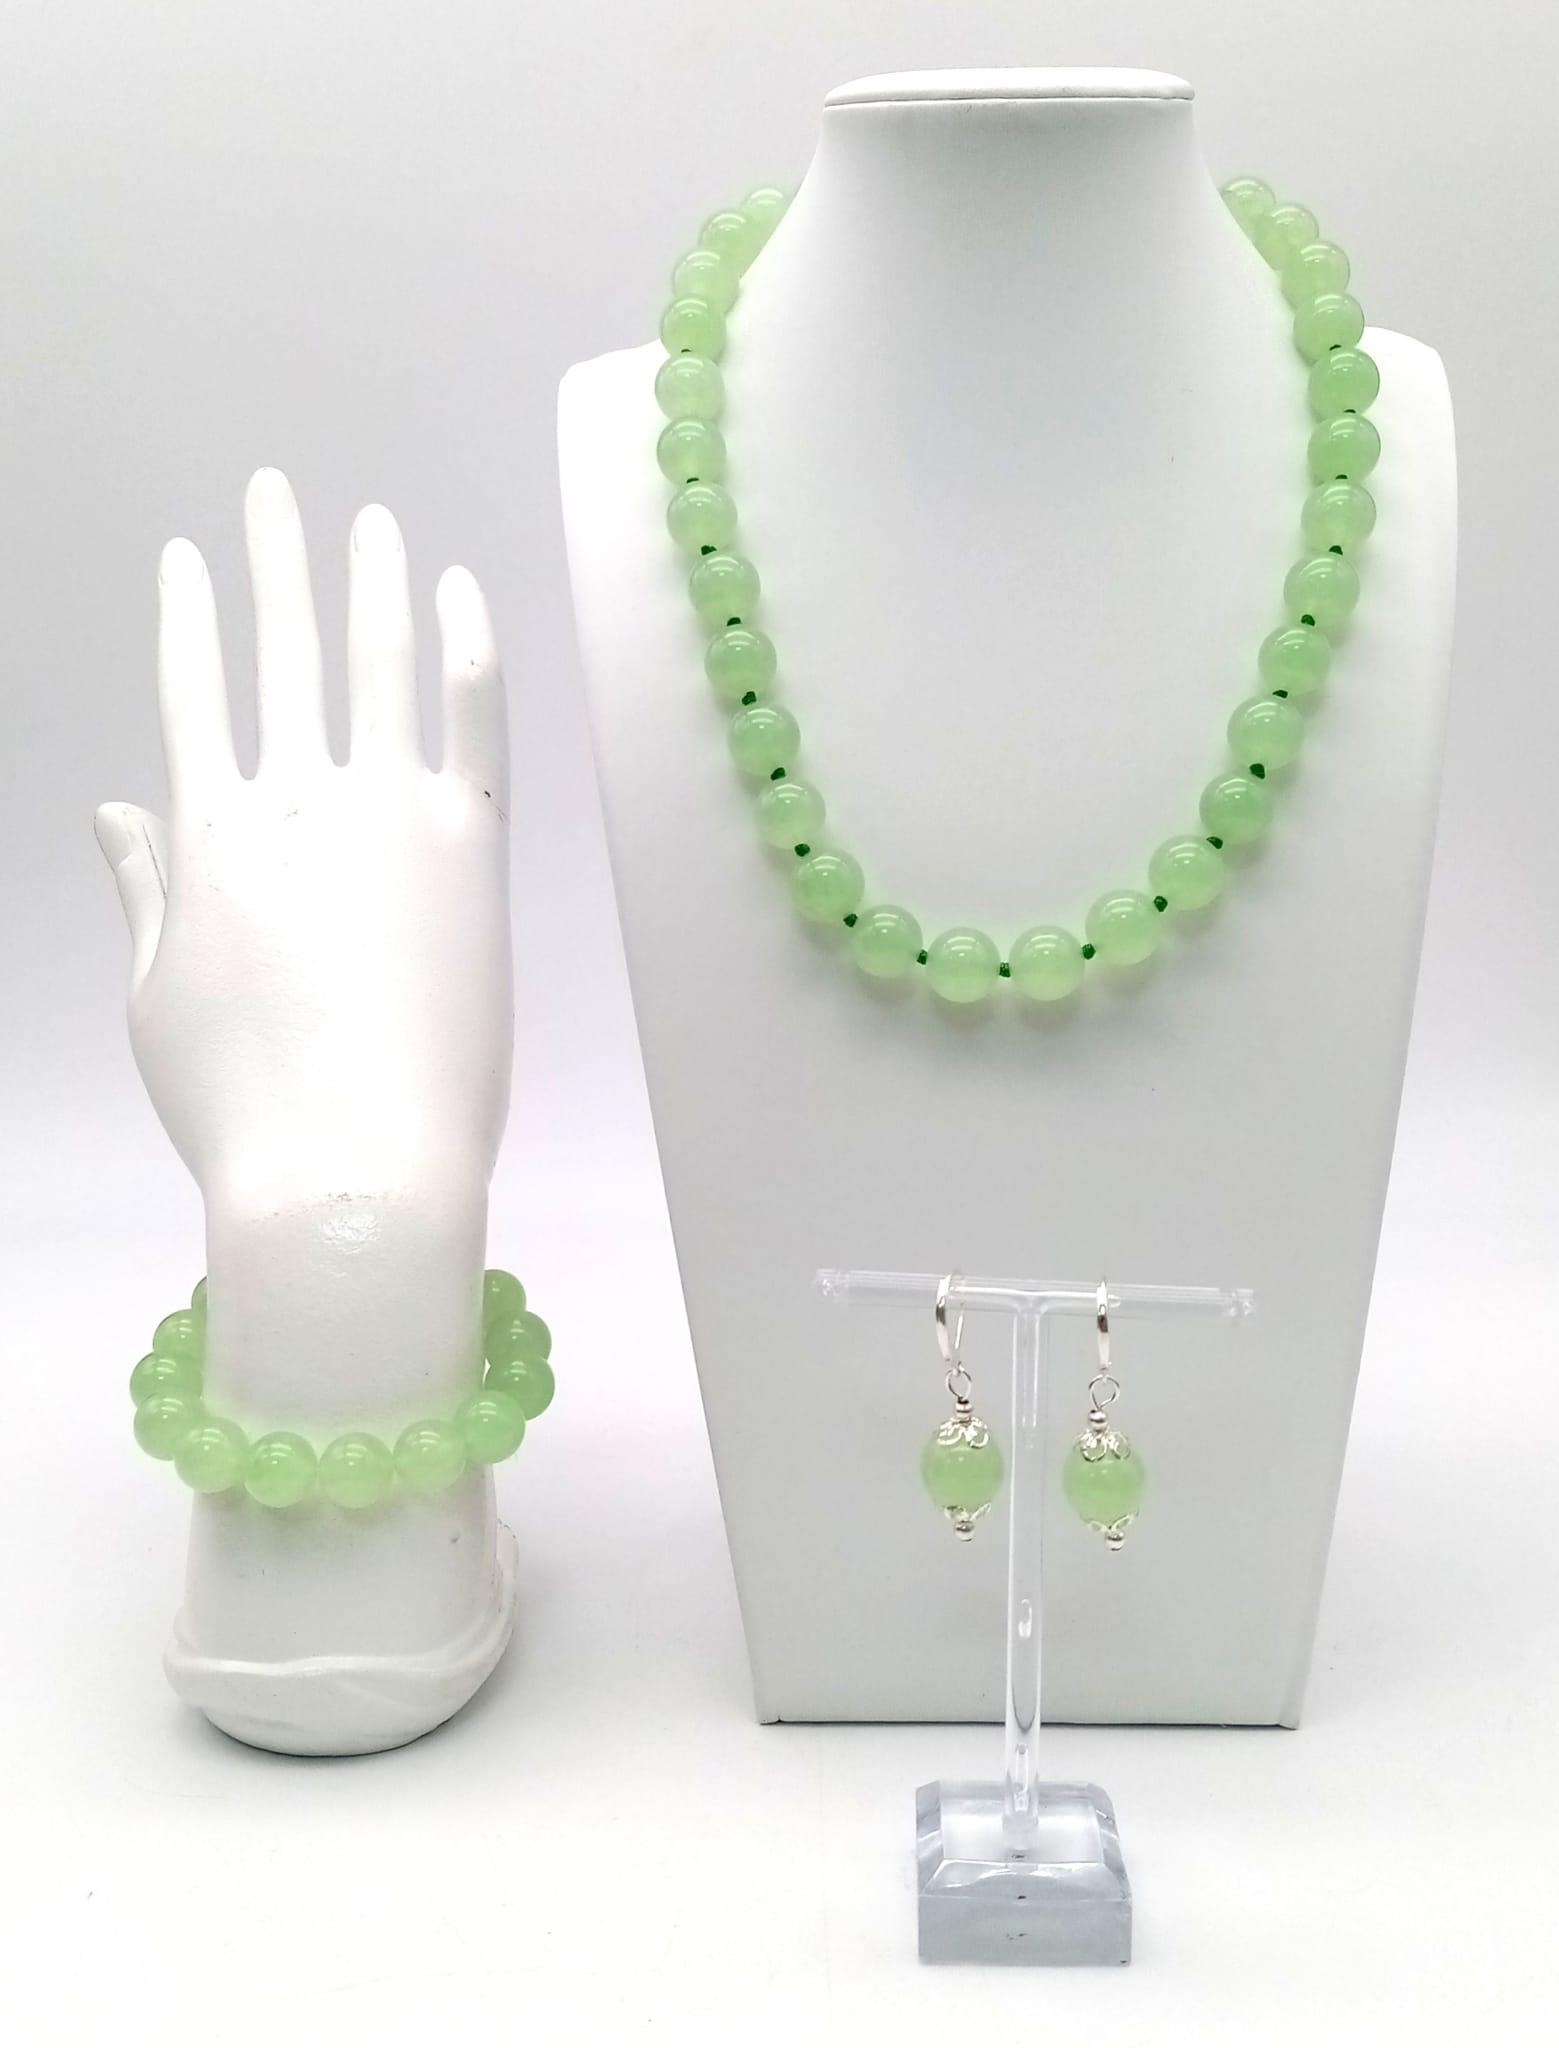 A Light Green Jade Necklace, Bracelet and Earring Set. 12mm beads. 42cm necklace. Expandable